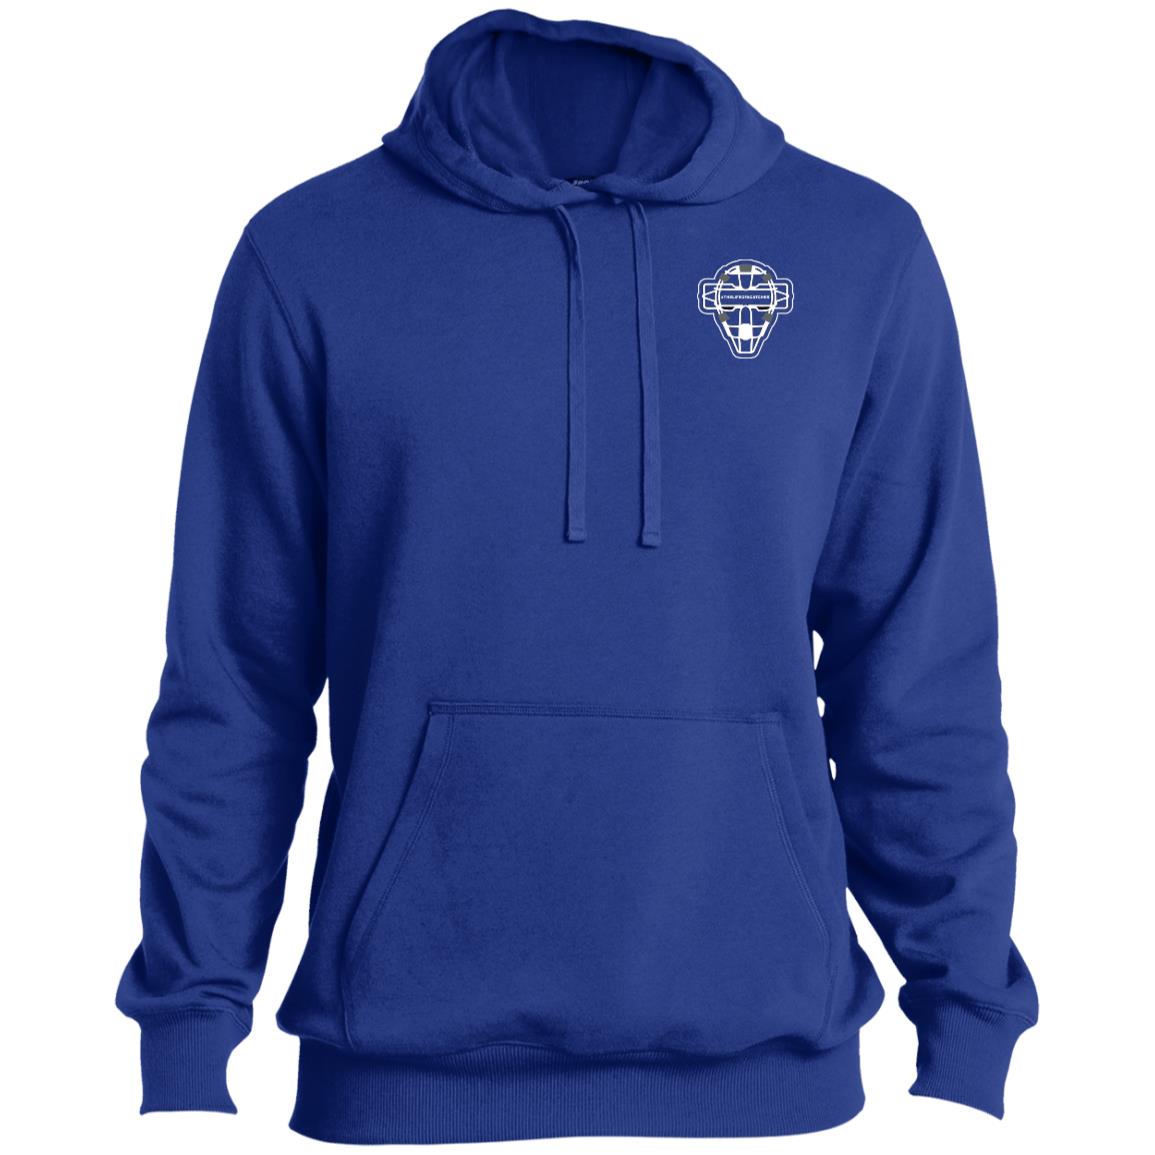 In My Catcher Mom Era Pullover Hoodie blue front